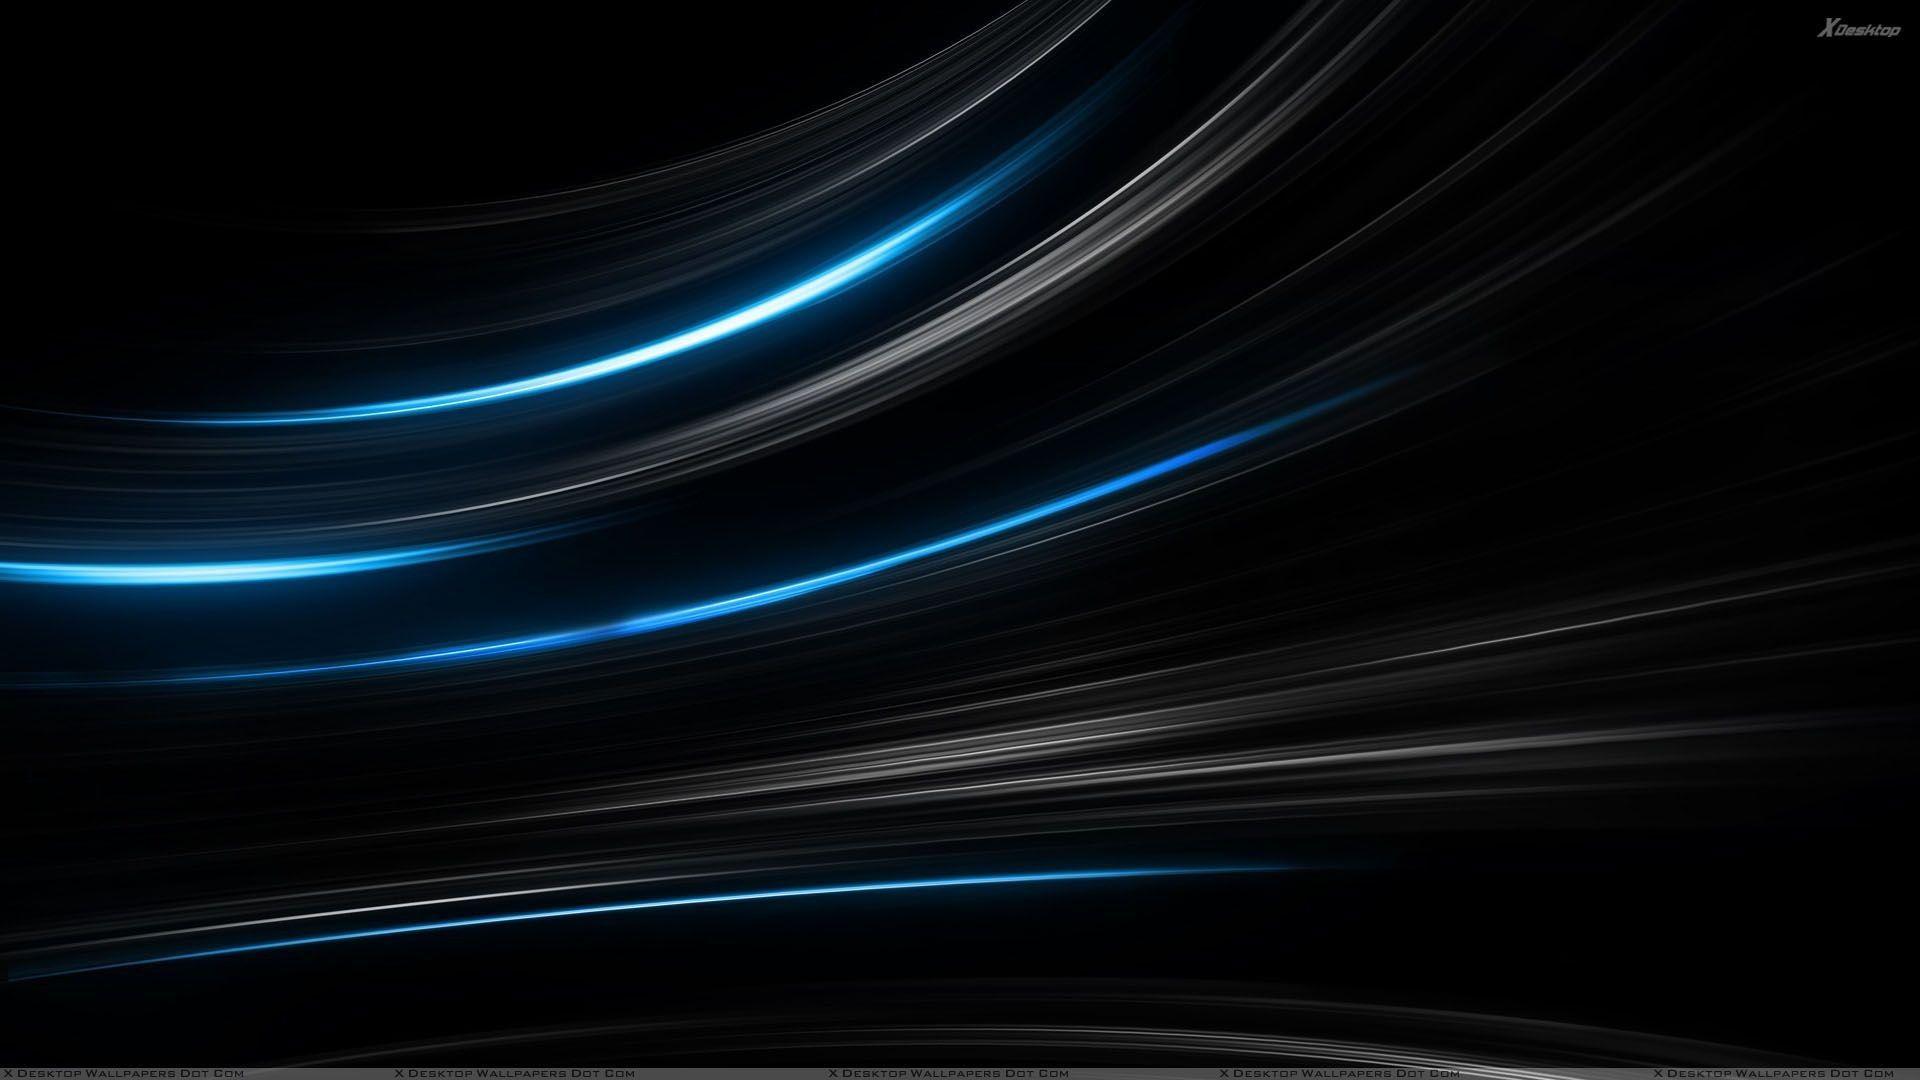 Blue and Black backgroundDownload free High Resolution